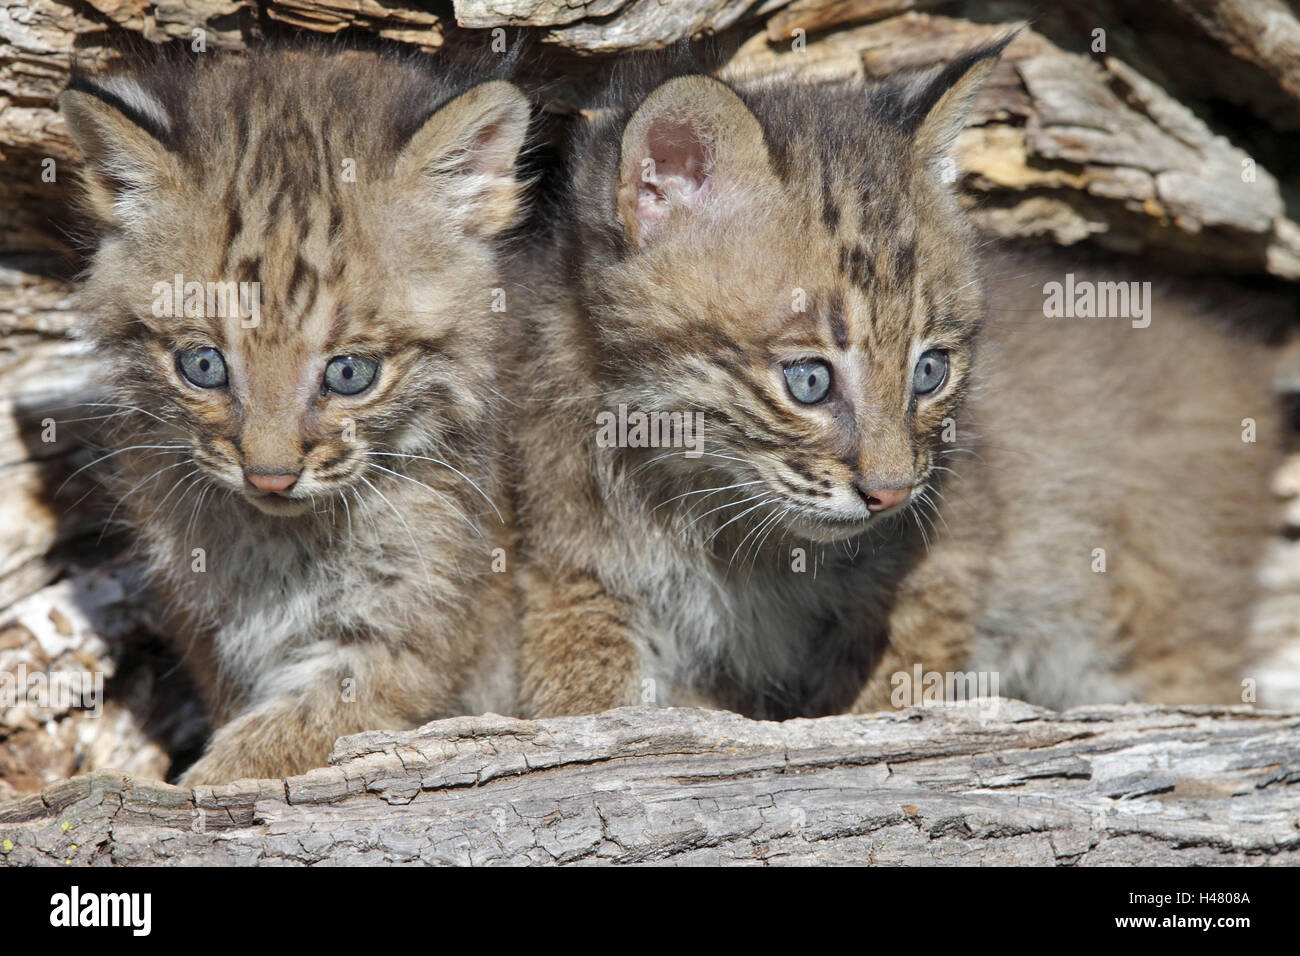 Red lynxes, Lynx rufus, young animal, trunk, Minnesota, the USA, Stock Photo